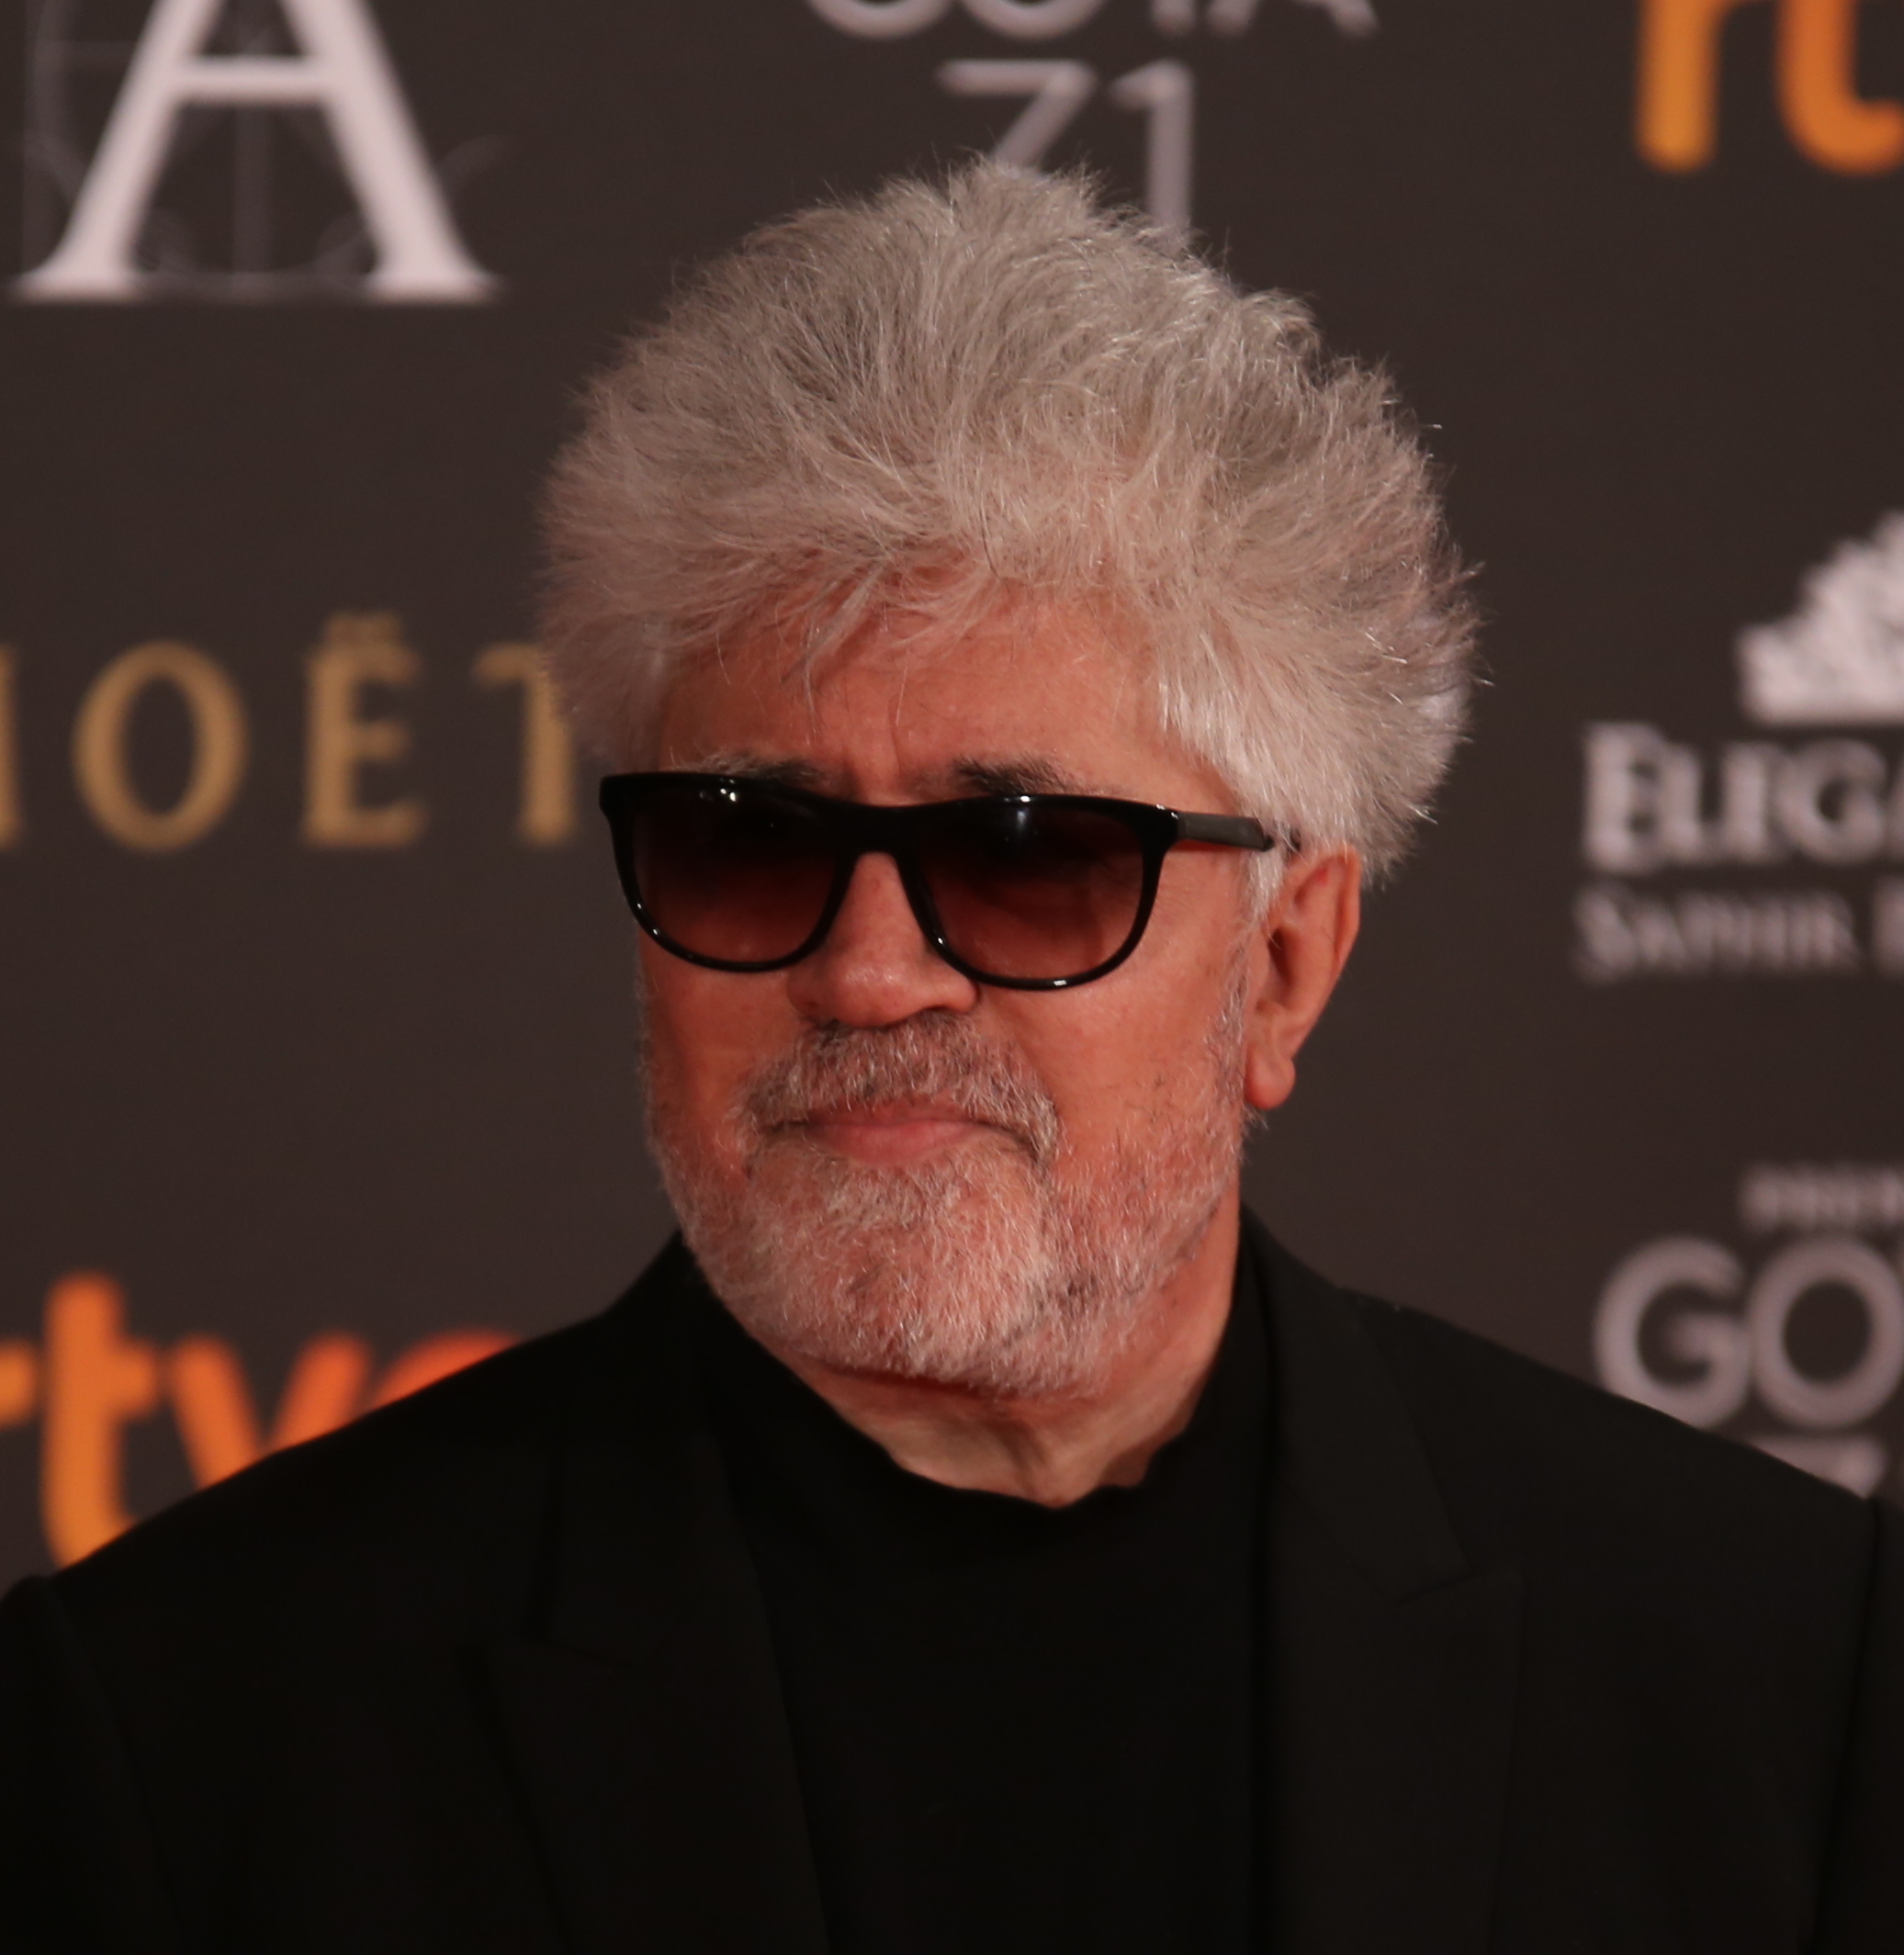 Entertainment News Roundup: Almodovar opens Venice film fest with tribute to those who disappeared under Franco; Asian-led 'Shang-Chi' battles for glory in Marvel's film universe and more 